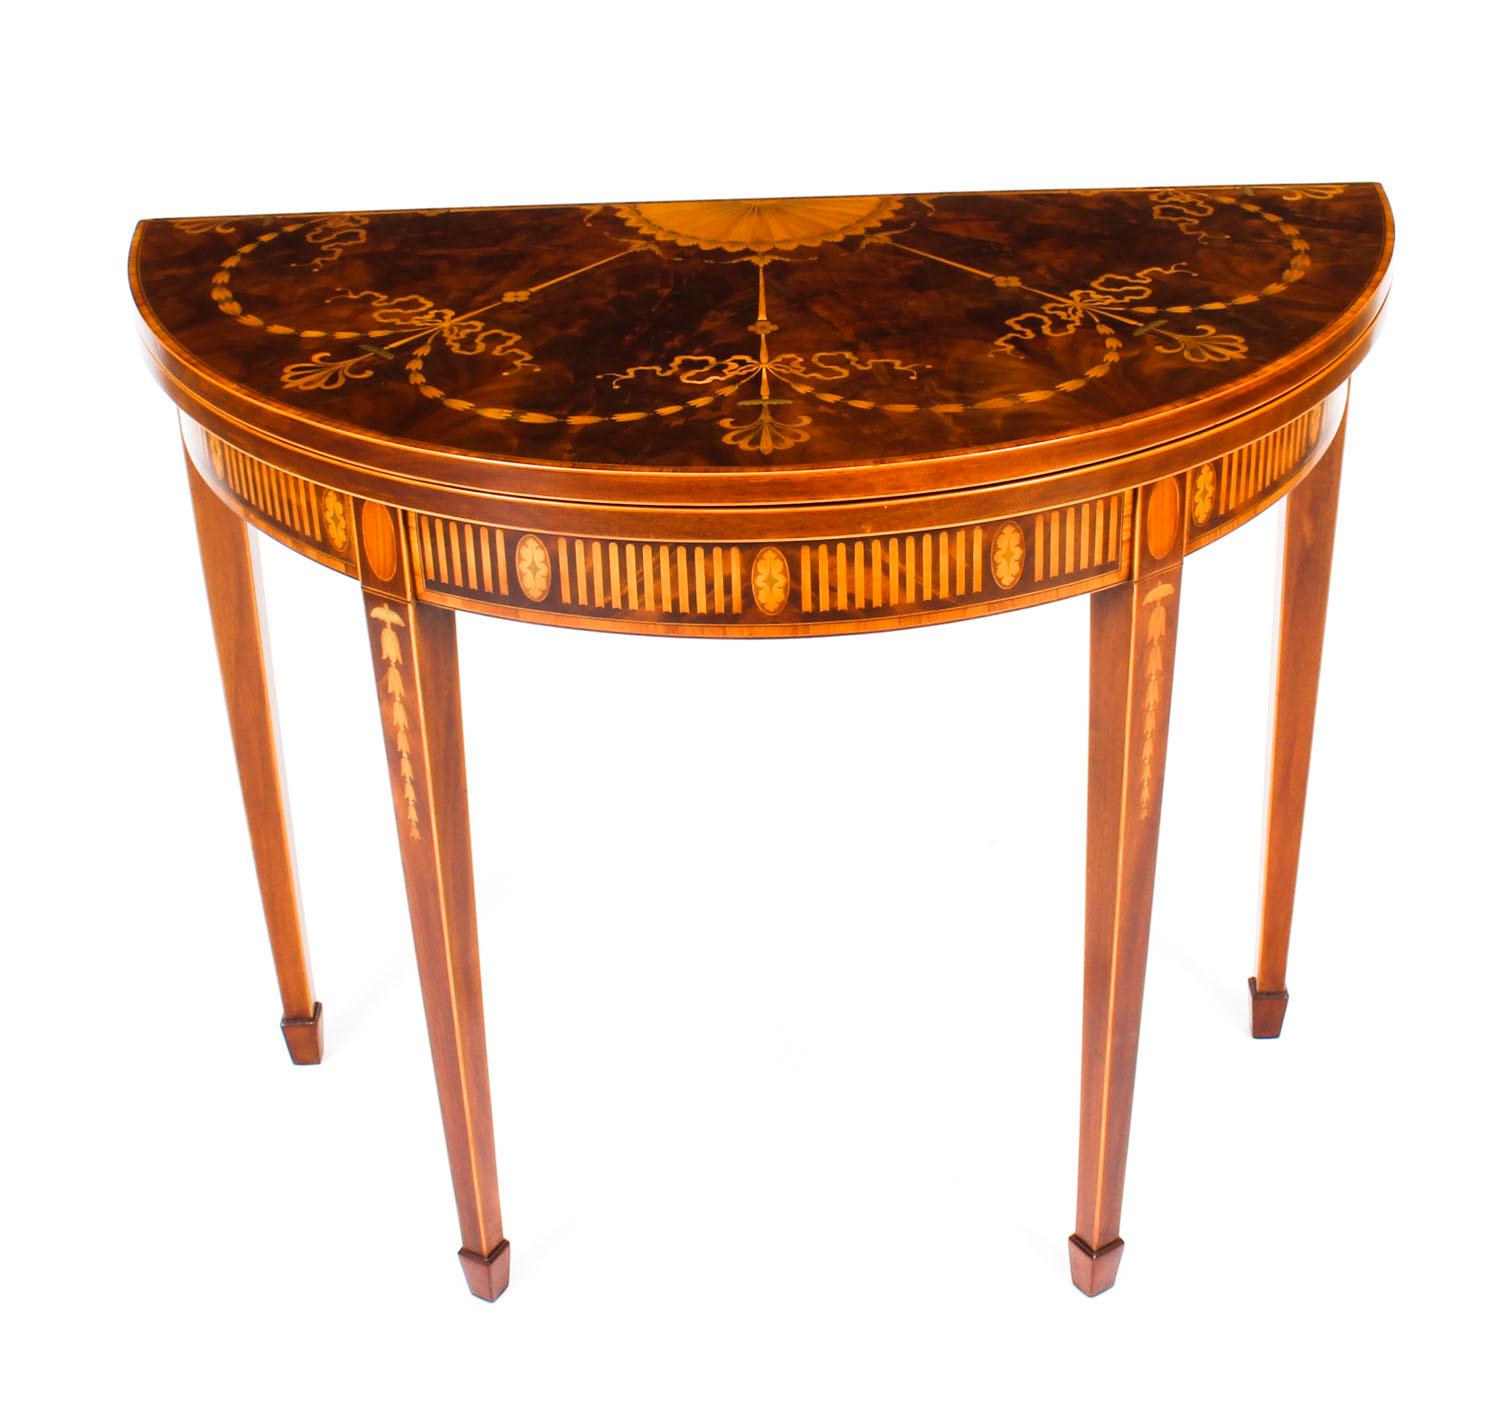 A superb Sheraton Revival flame mahogany half round fold over card table, circa 1870 in date.

The top with cross banding and stunning marquetry decoration of shell, ribbons and swags over a decorative frieze inlaid with shells and satinwood